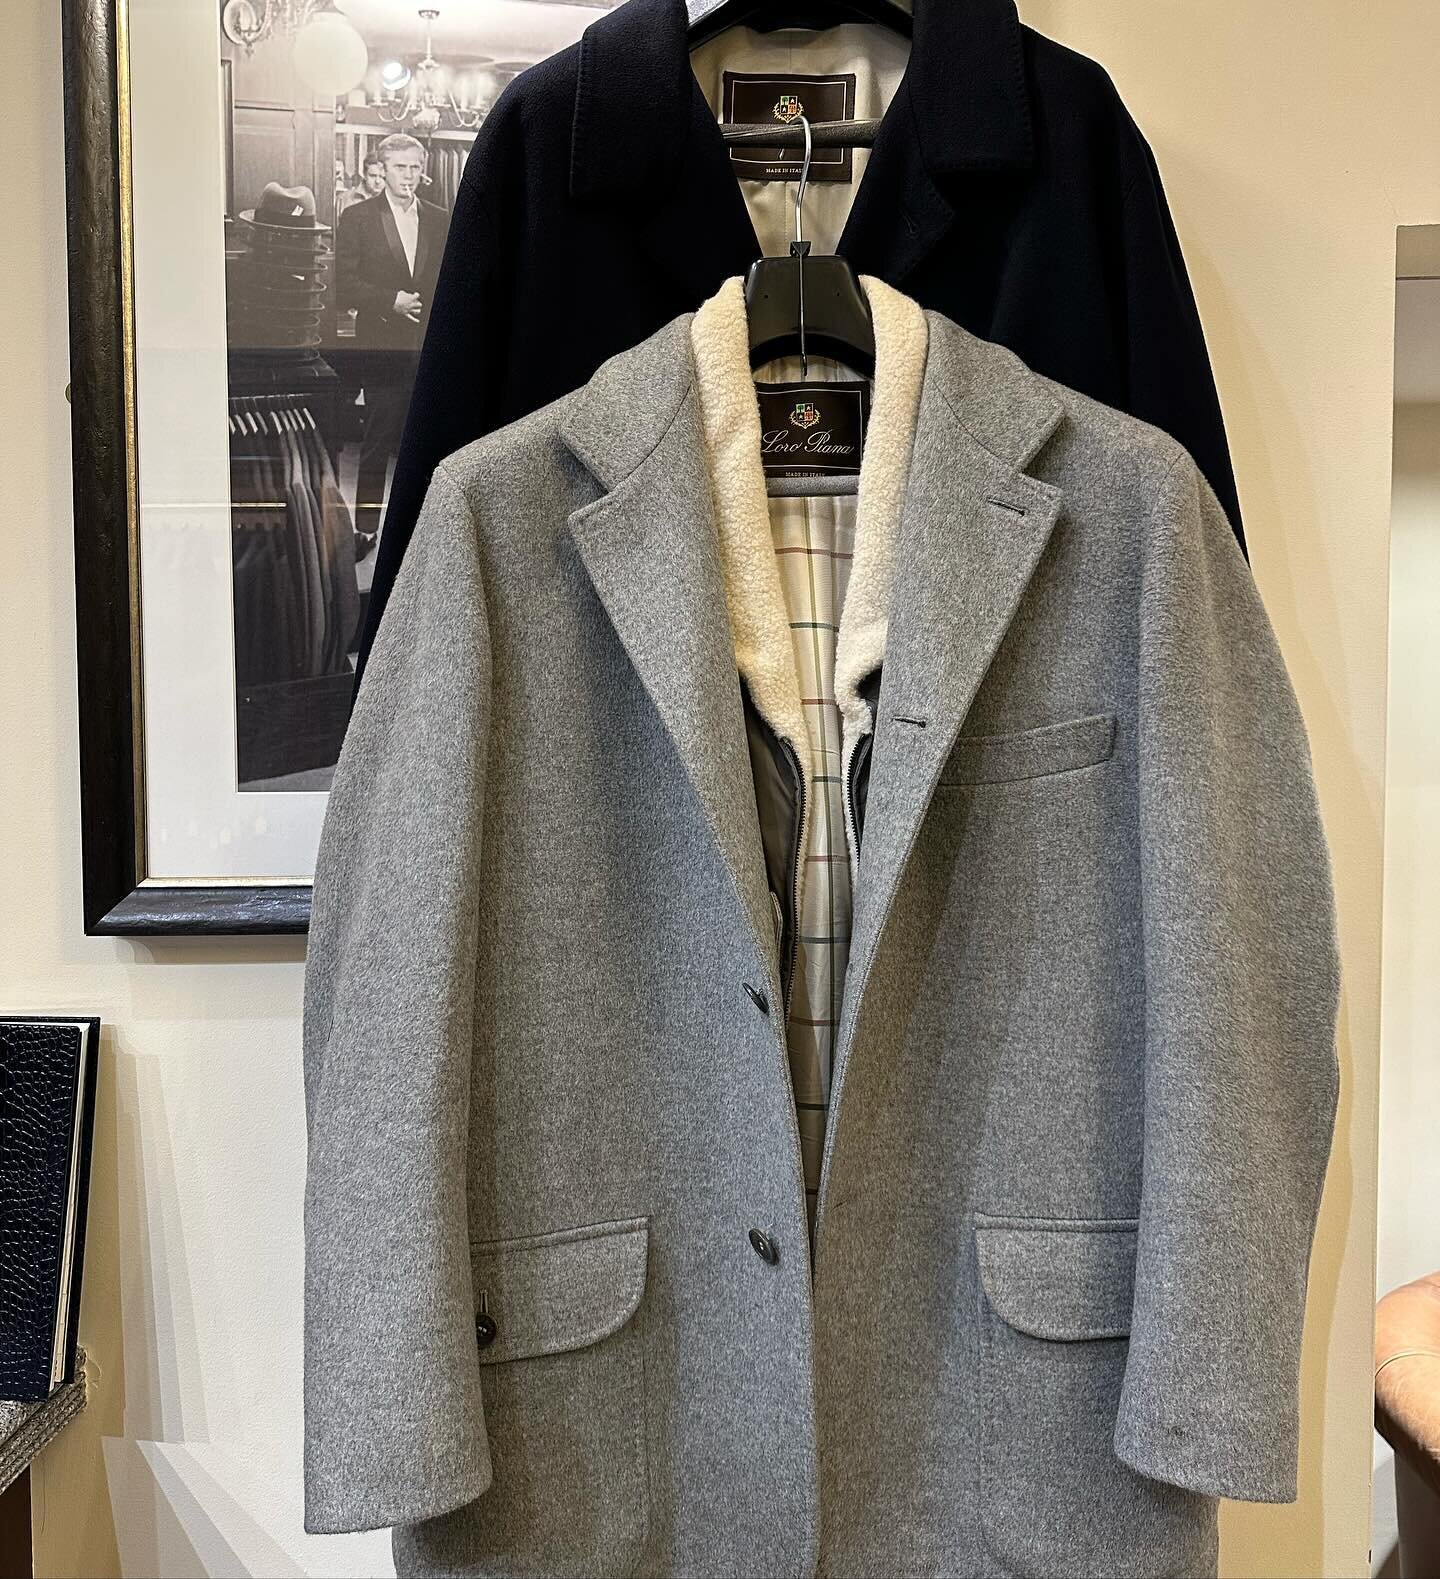 This client has lost a considerable amount of weight over the last few years so we were given the task to fully re-cut and re-style these two beautiful Loro Piana Storm system coats.

The navy cashmere was taken in through the side seams and centre s